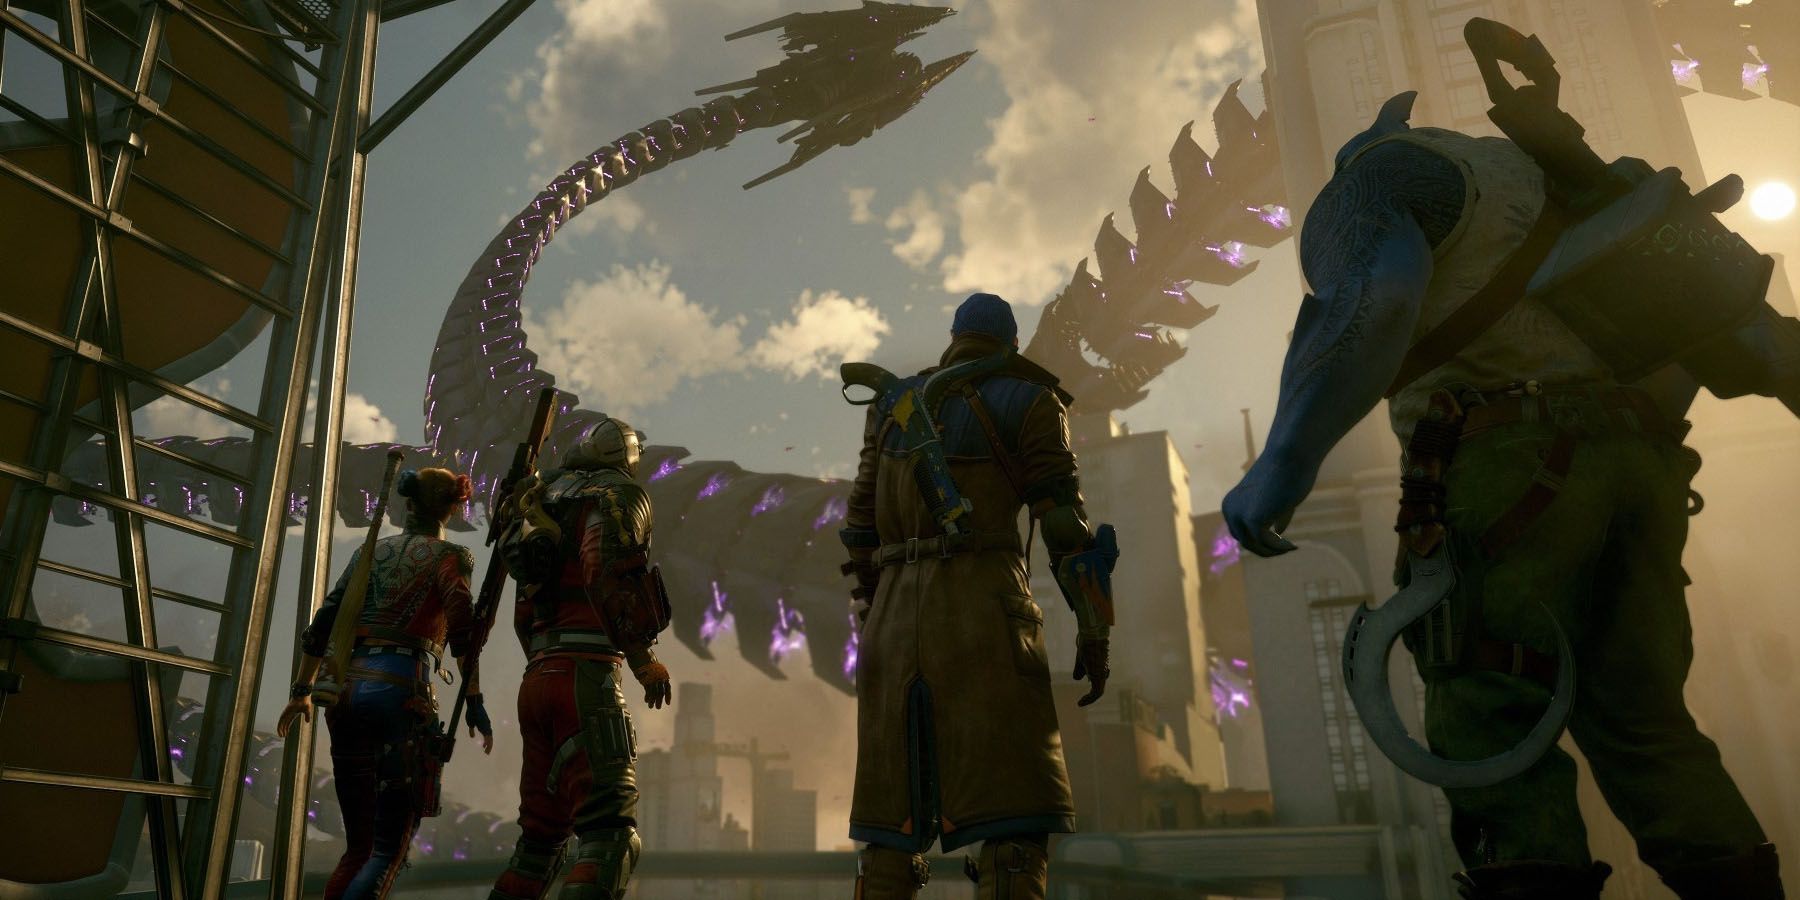 A screenshot from Suicide Squad Kill the Justice League, featuring Harley Quinn, Deadshot, Captain Boomerang, and King Shark facing off against a Skull Ship tentacle in a ruined city.